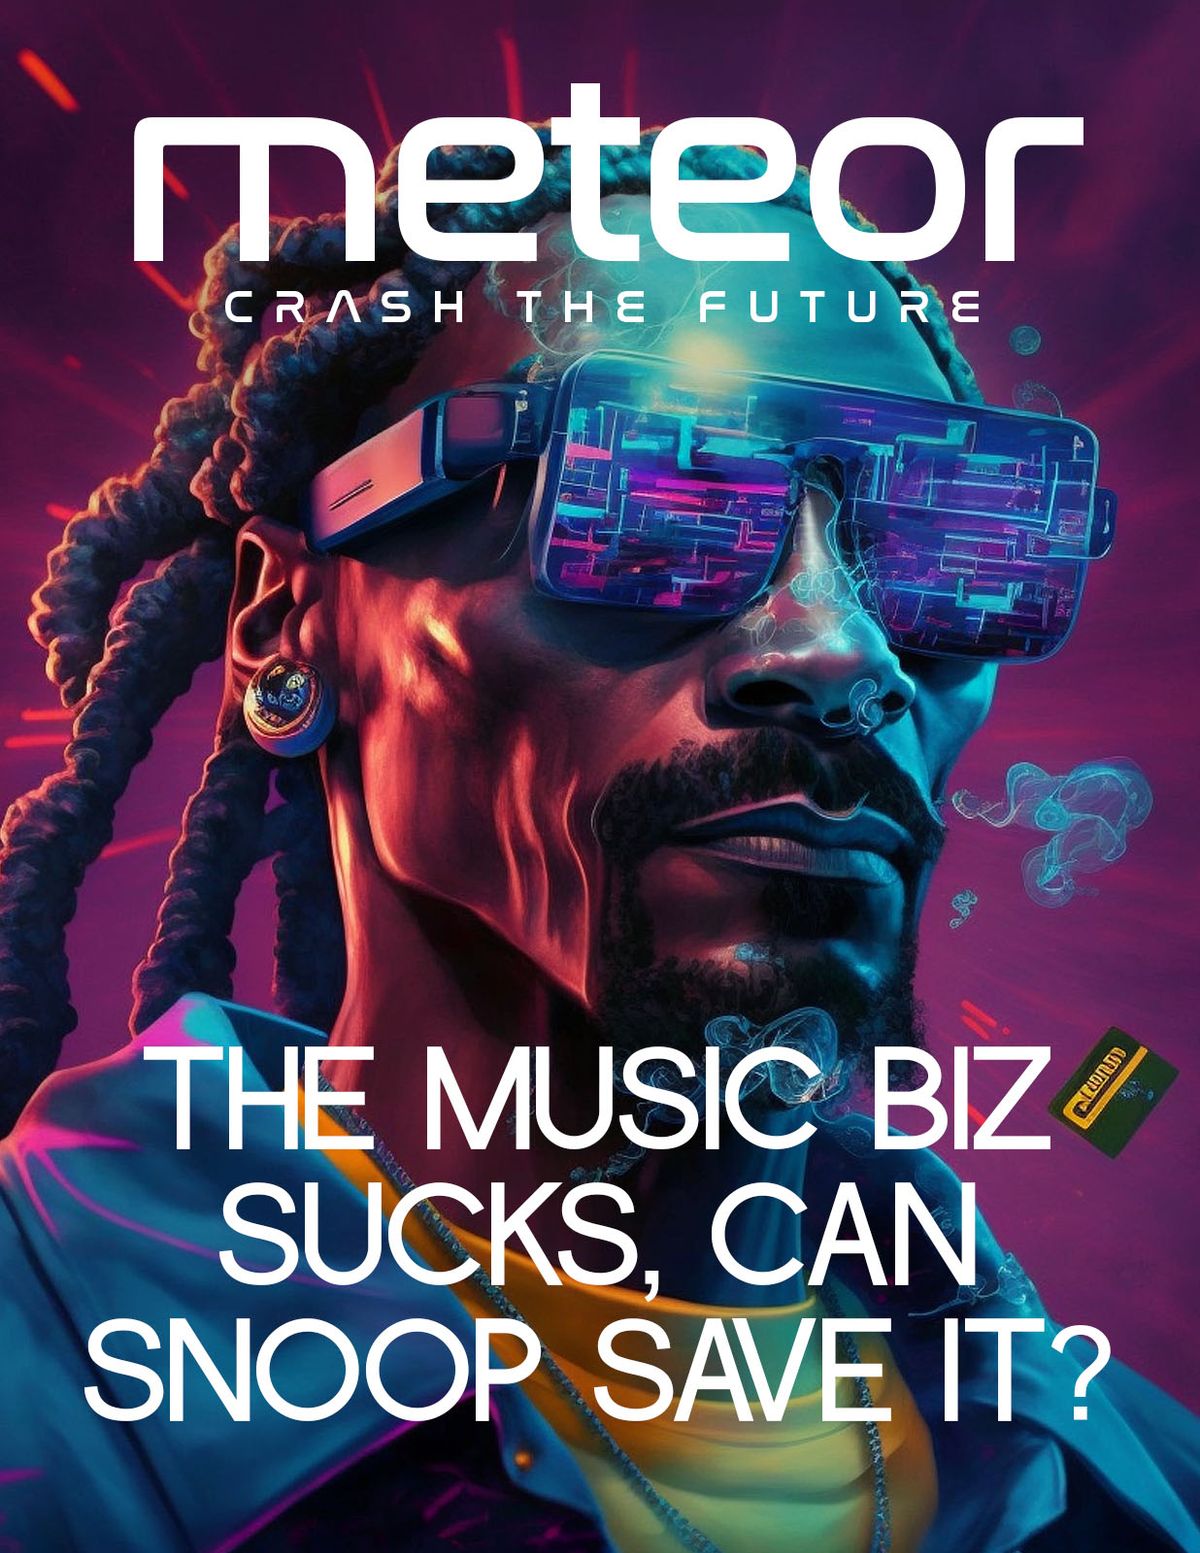 The Music Business Sucks, Can Snoop Save It?